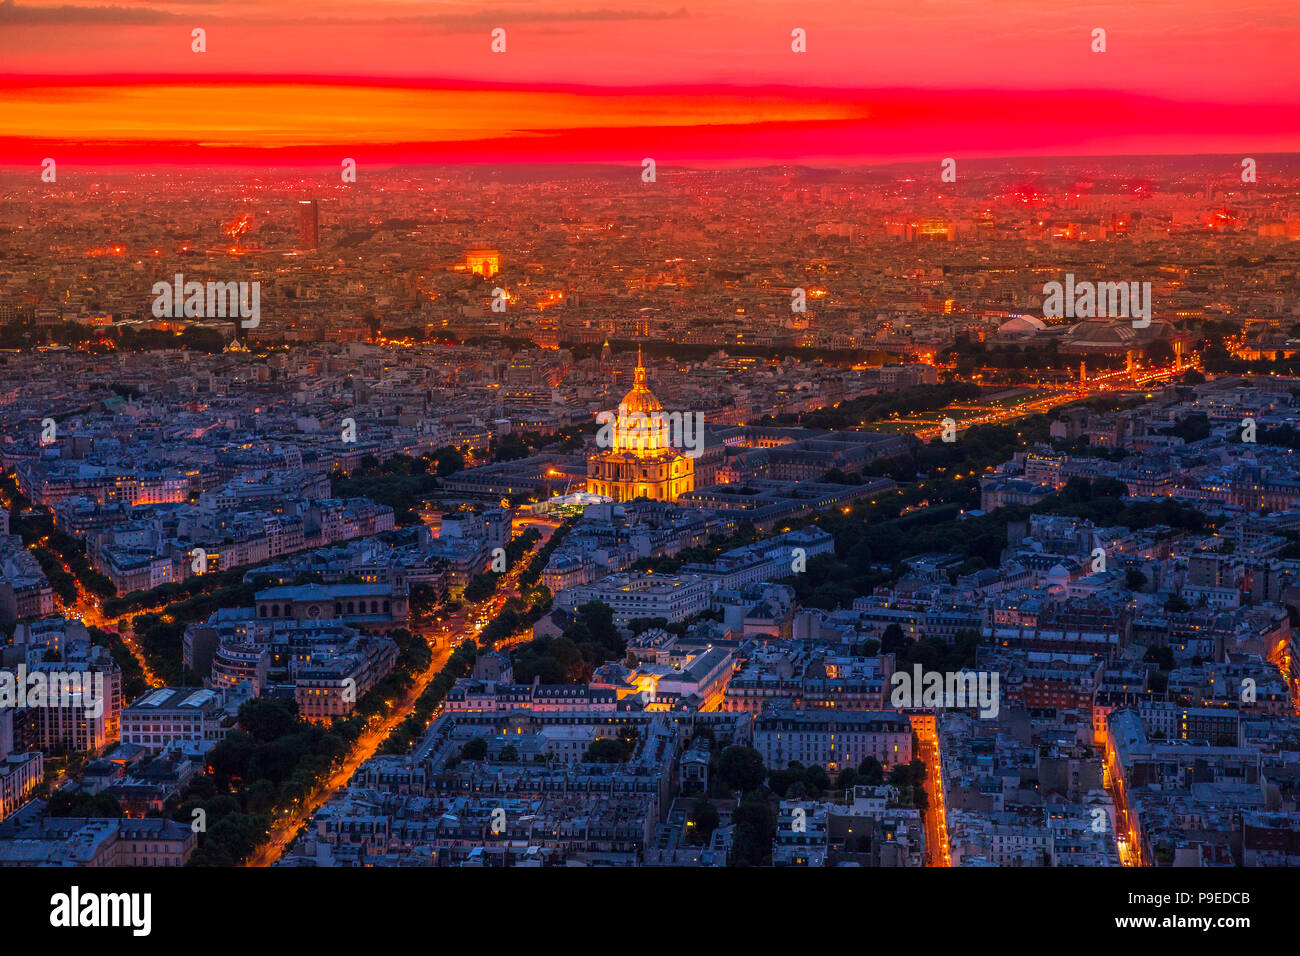 Aerial view of residence of the palace on red sunset with night street light from panoramic terrace of Tour Montparnasse. Paris urban skyline cityscape. European capital of France Stock Photo -